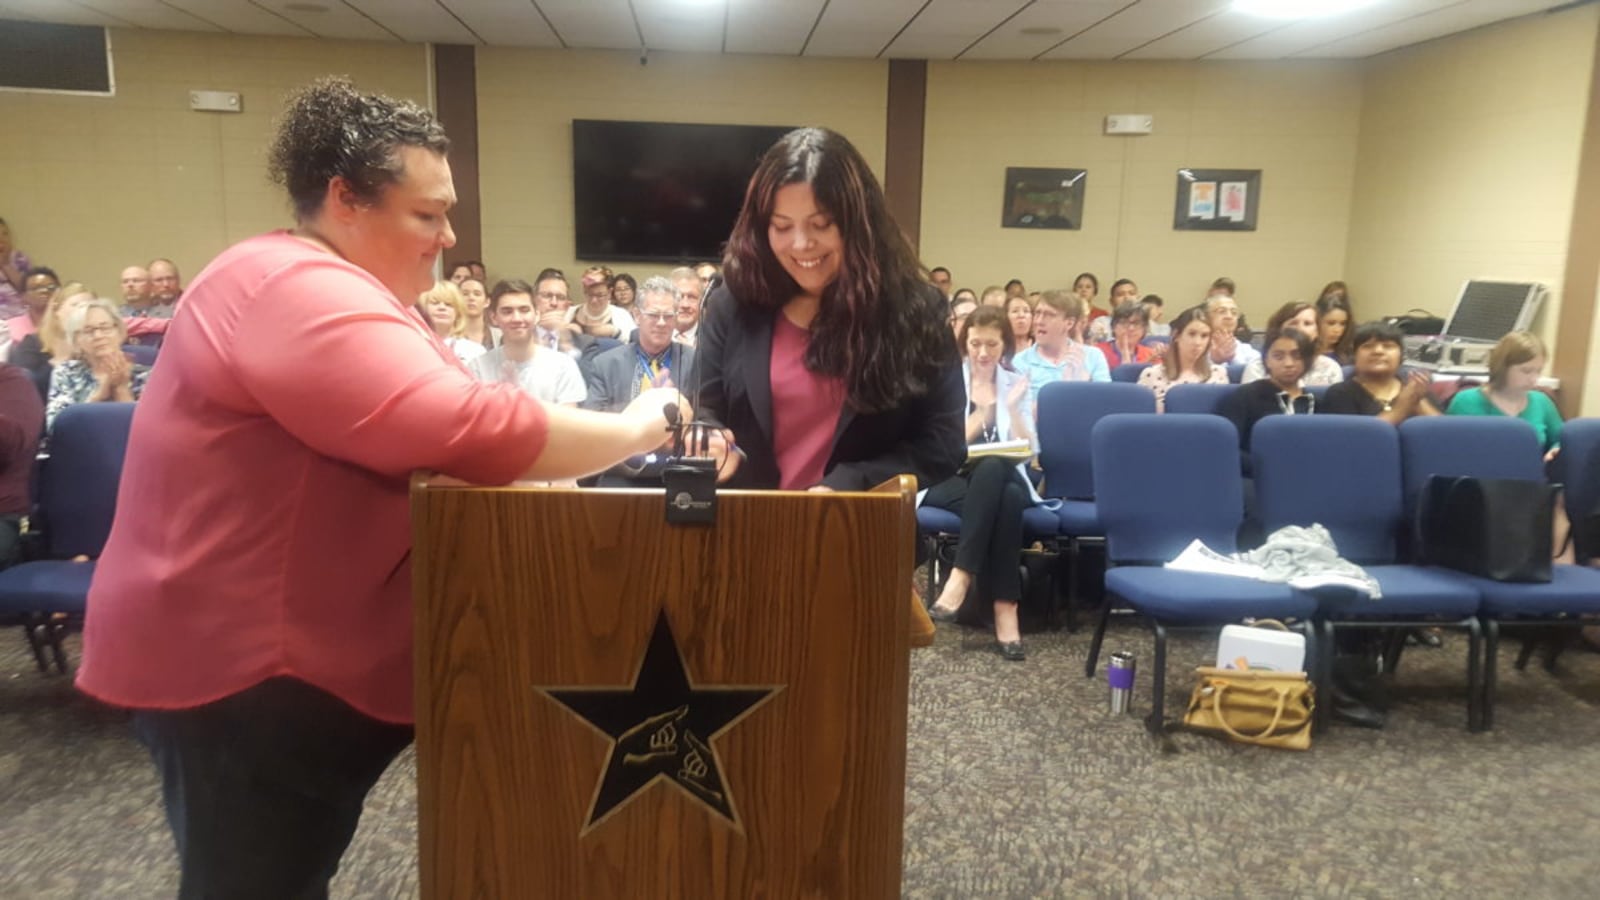 Laura Martinez, on the right, was sworn in as a member of the Adams 14 school board.